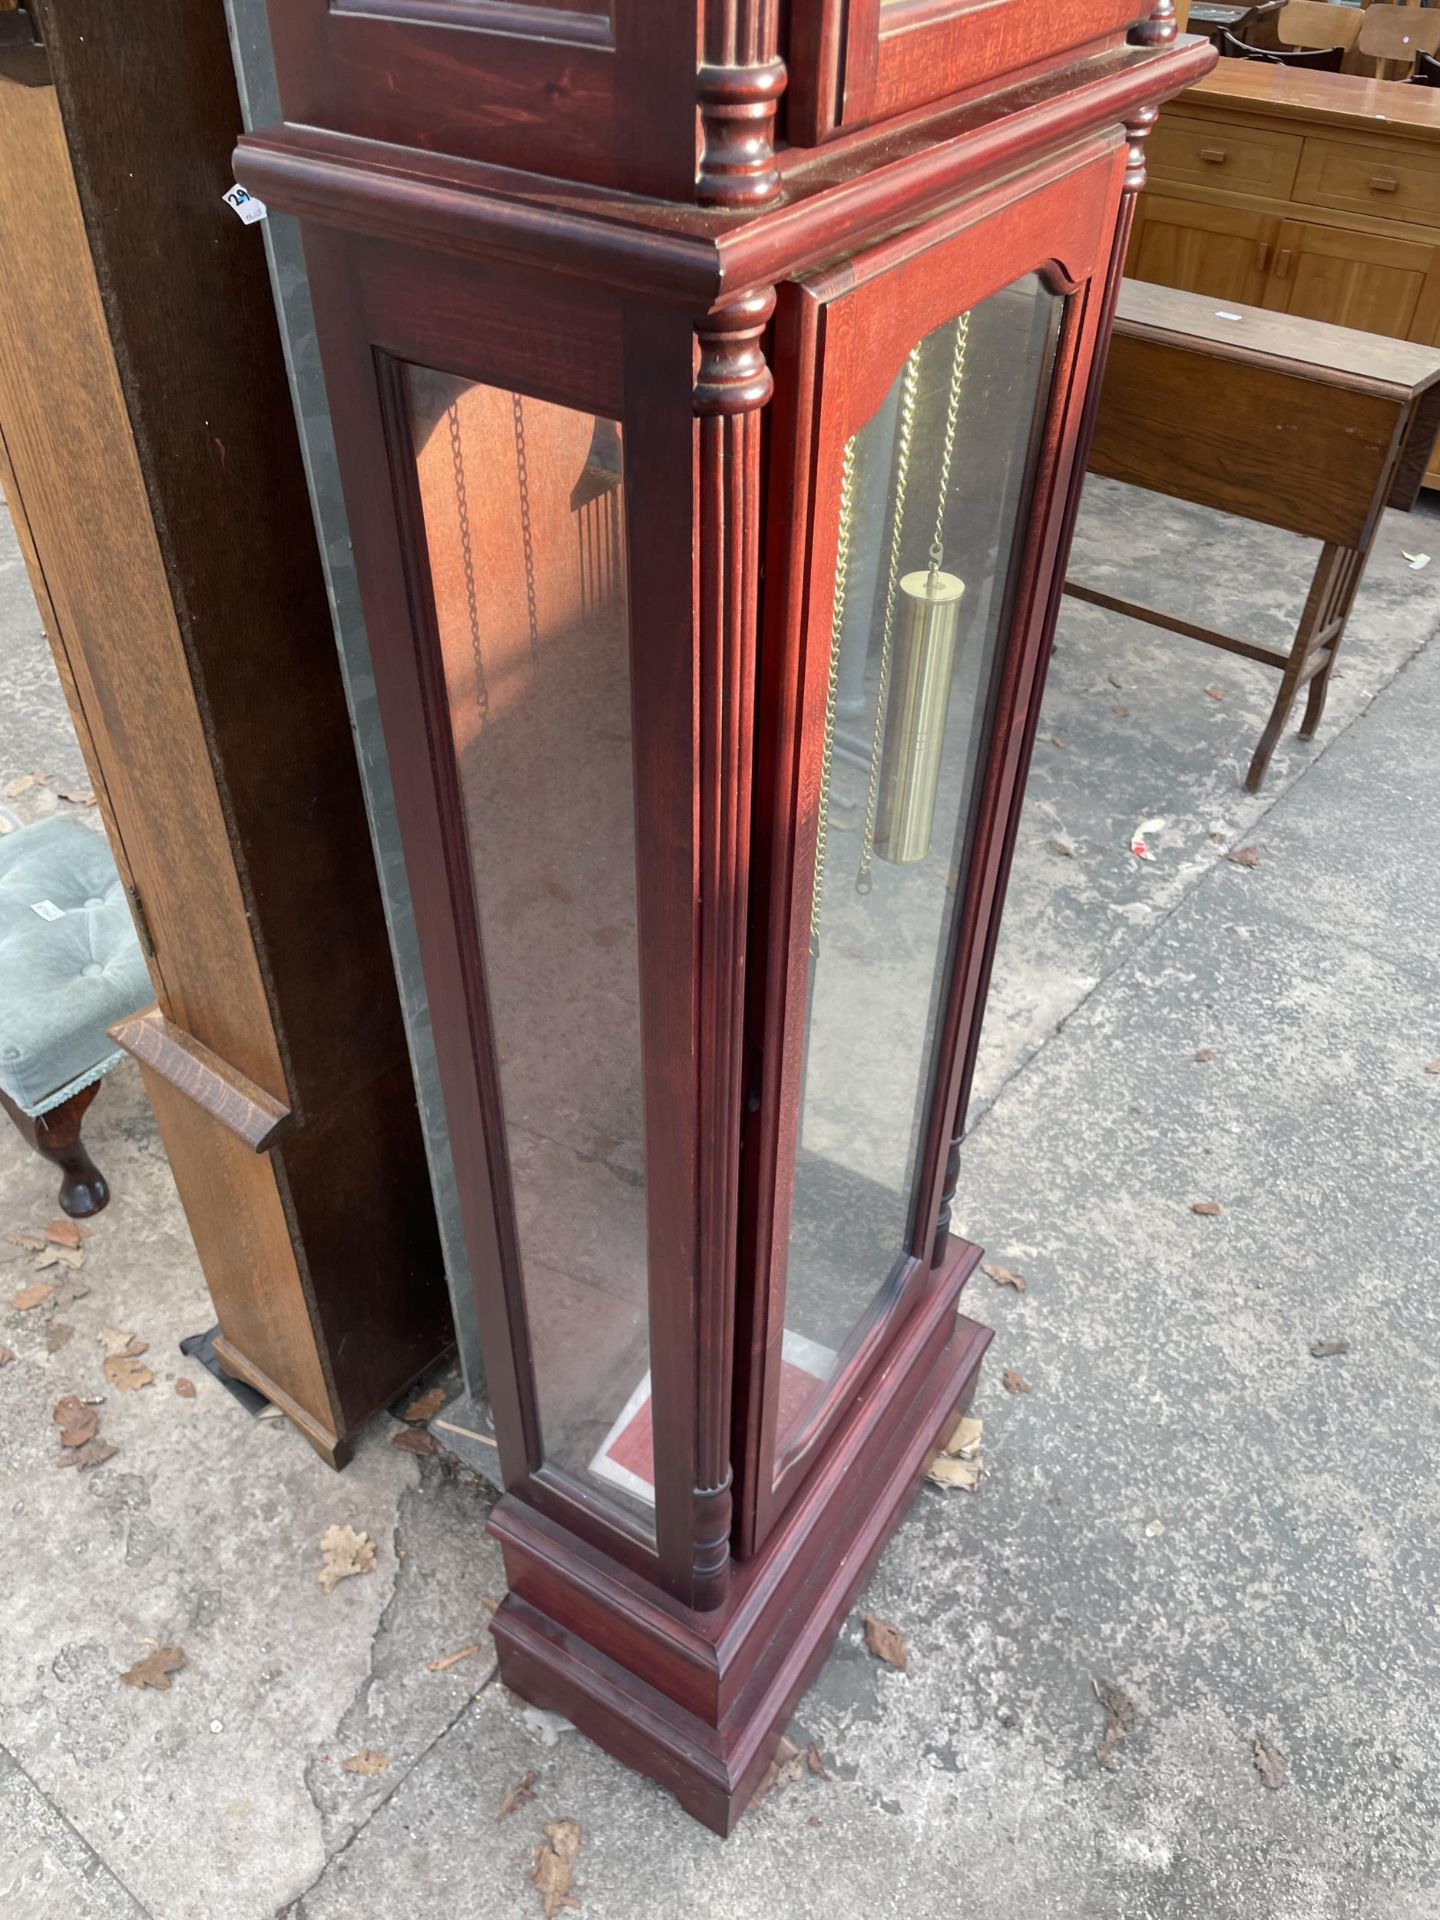 AN AEON WINDSOR 31 DAY LONGCASE CLOCK WITH GLASS DOOR AND TWO WEIGHTS - Image 3 of 5